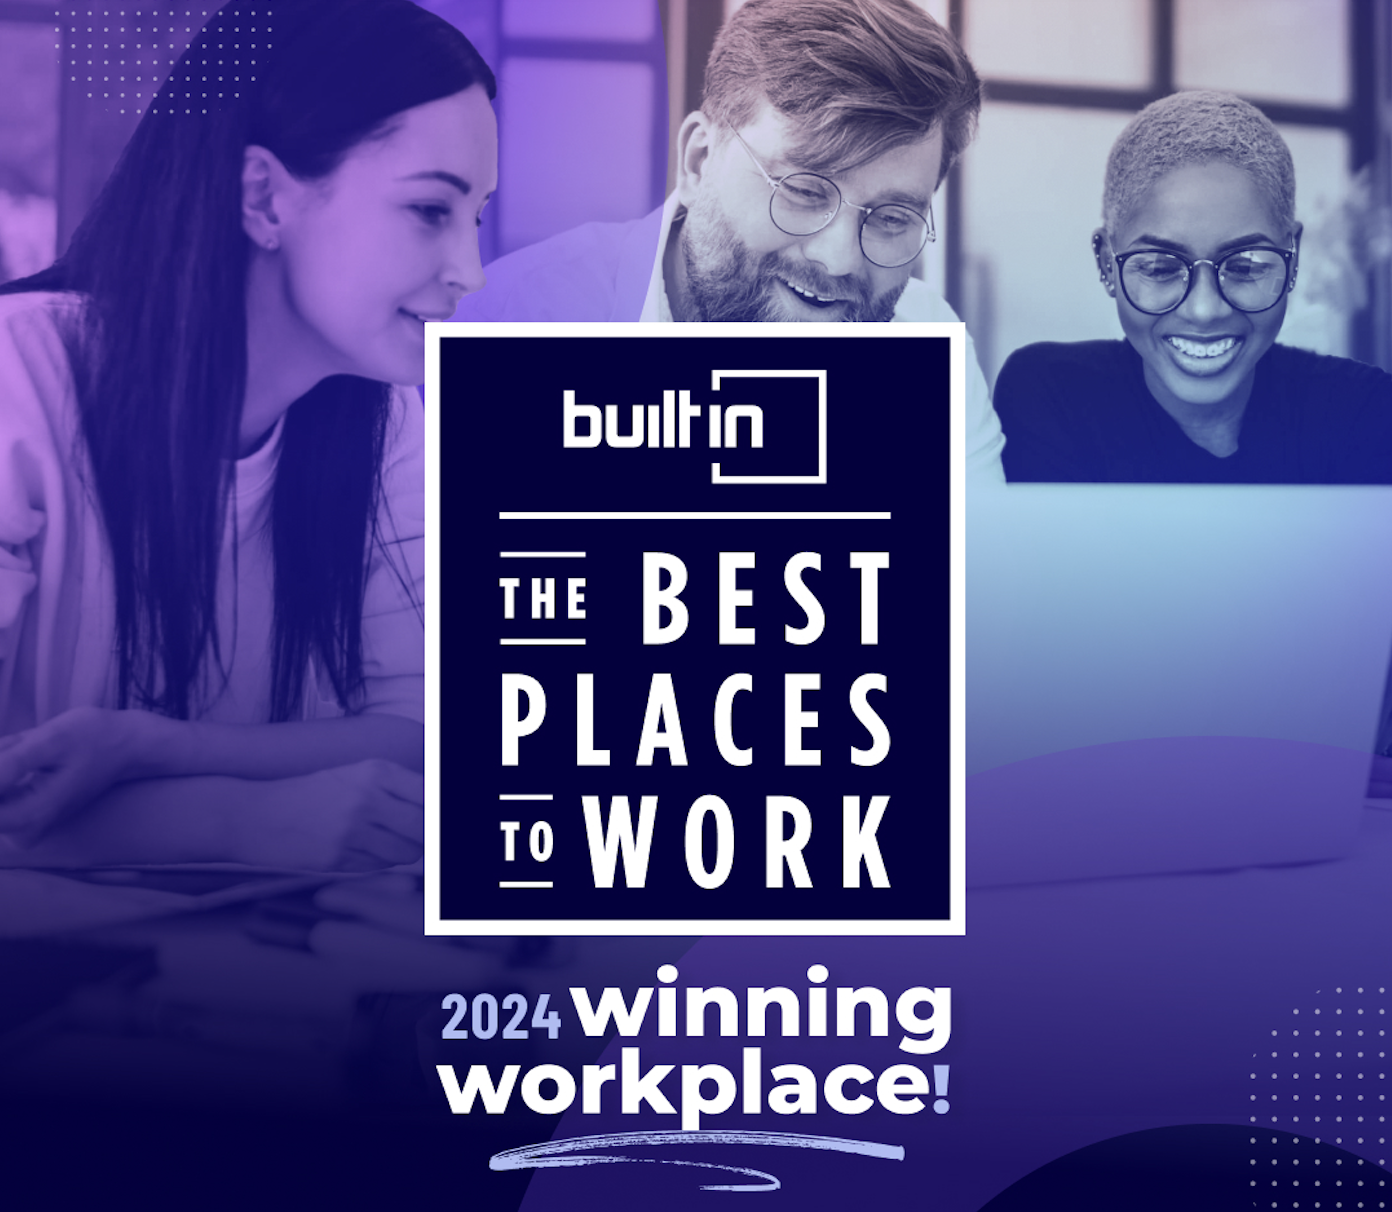 Built In Honors HealthJoy as a 2024 Best Place To Work